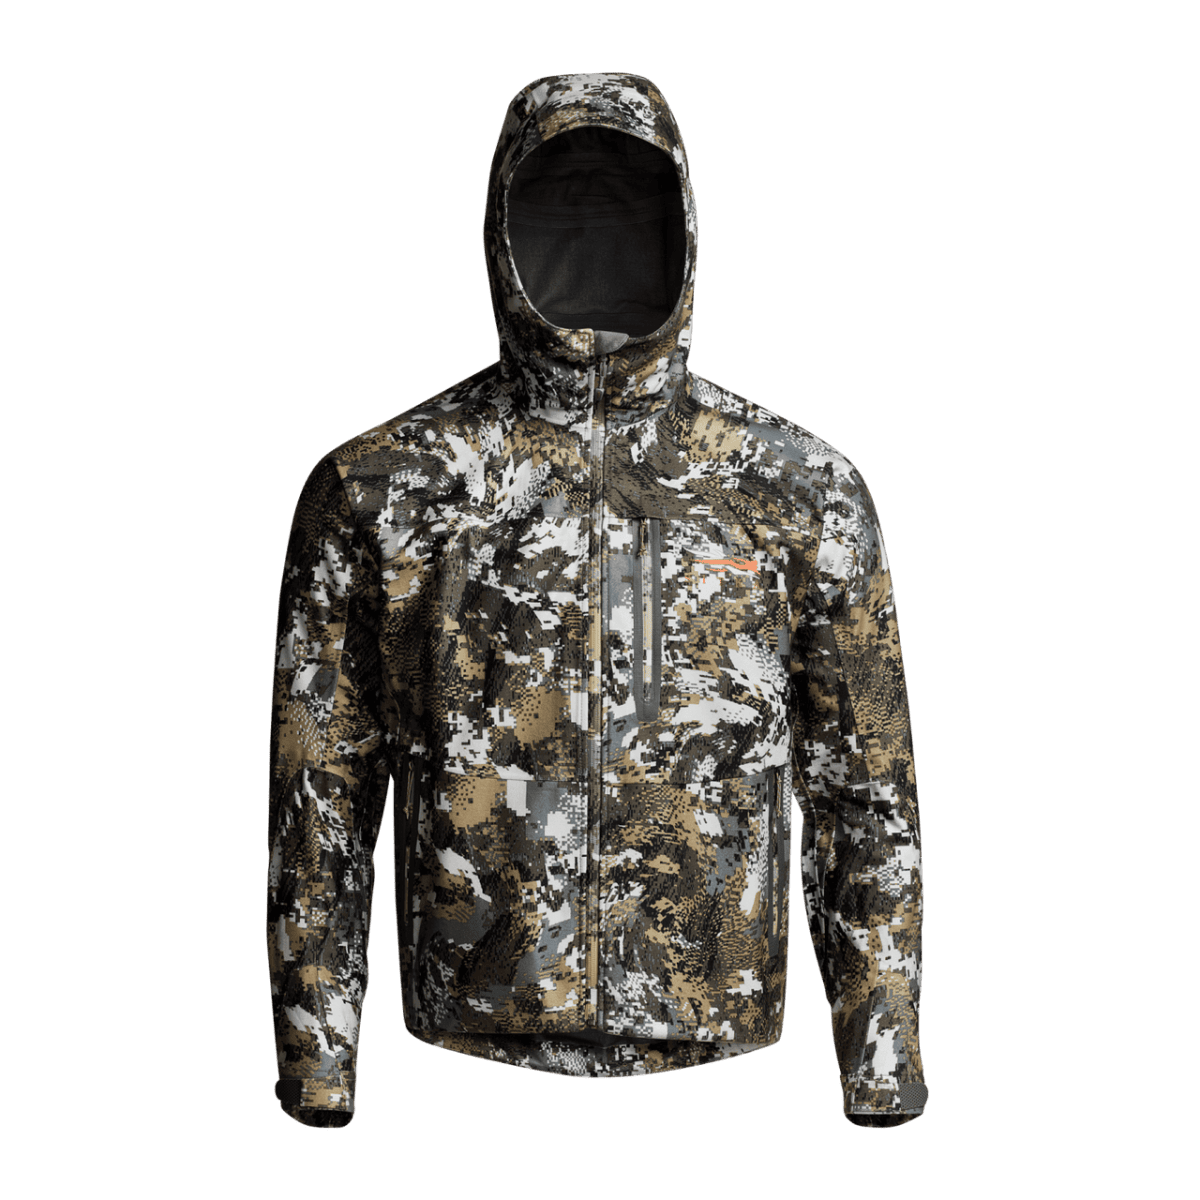 21 Cool Father'S Day Gifts For Outdoorsmen Who Are In Touch With Nature 9 Daily Mom, Magazine For Families